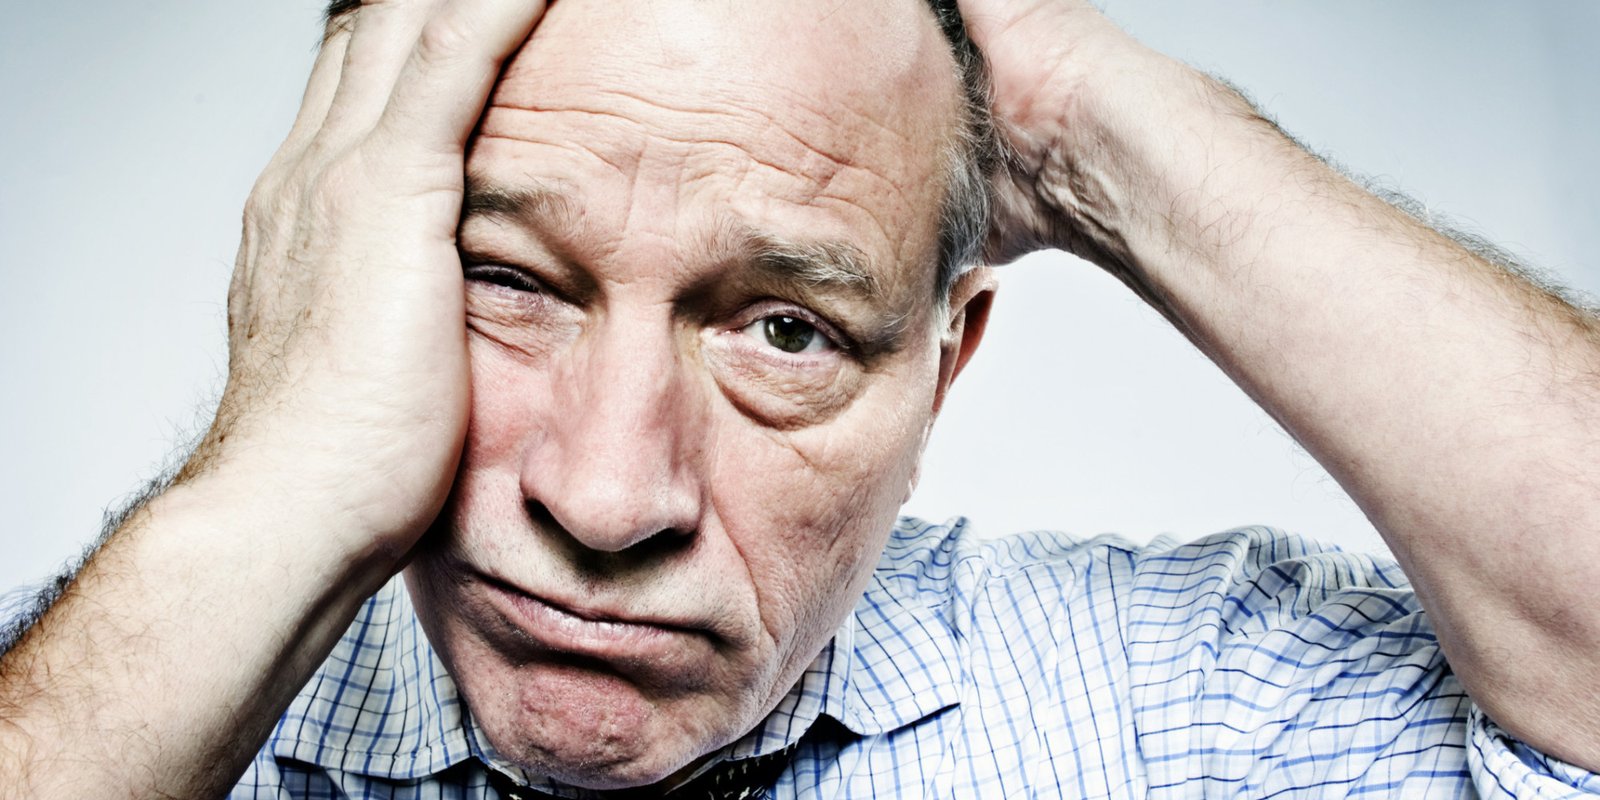 How long does male menopause last?